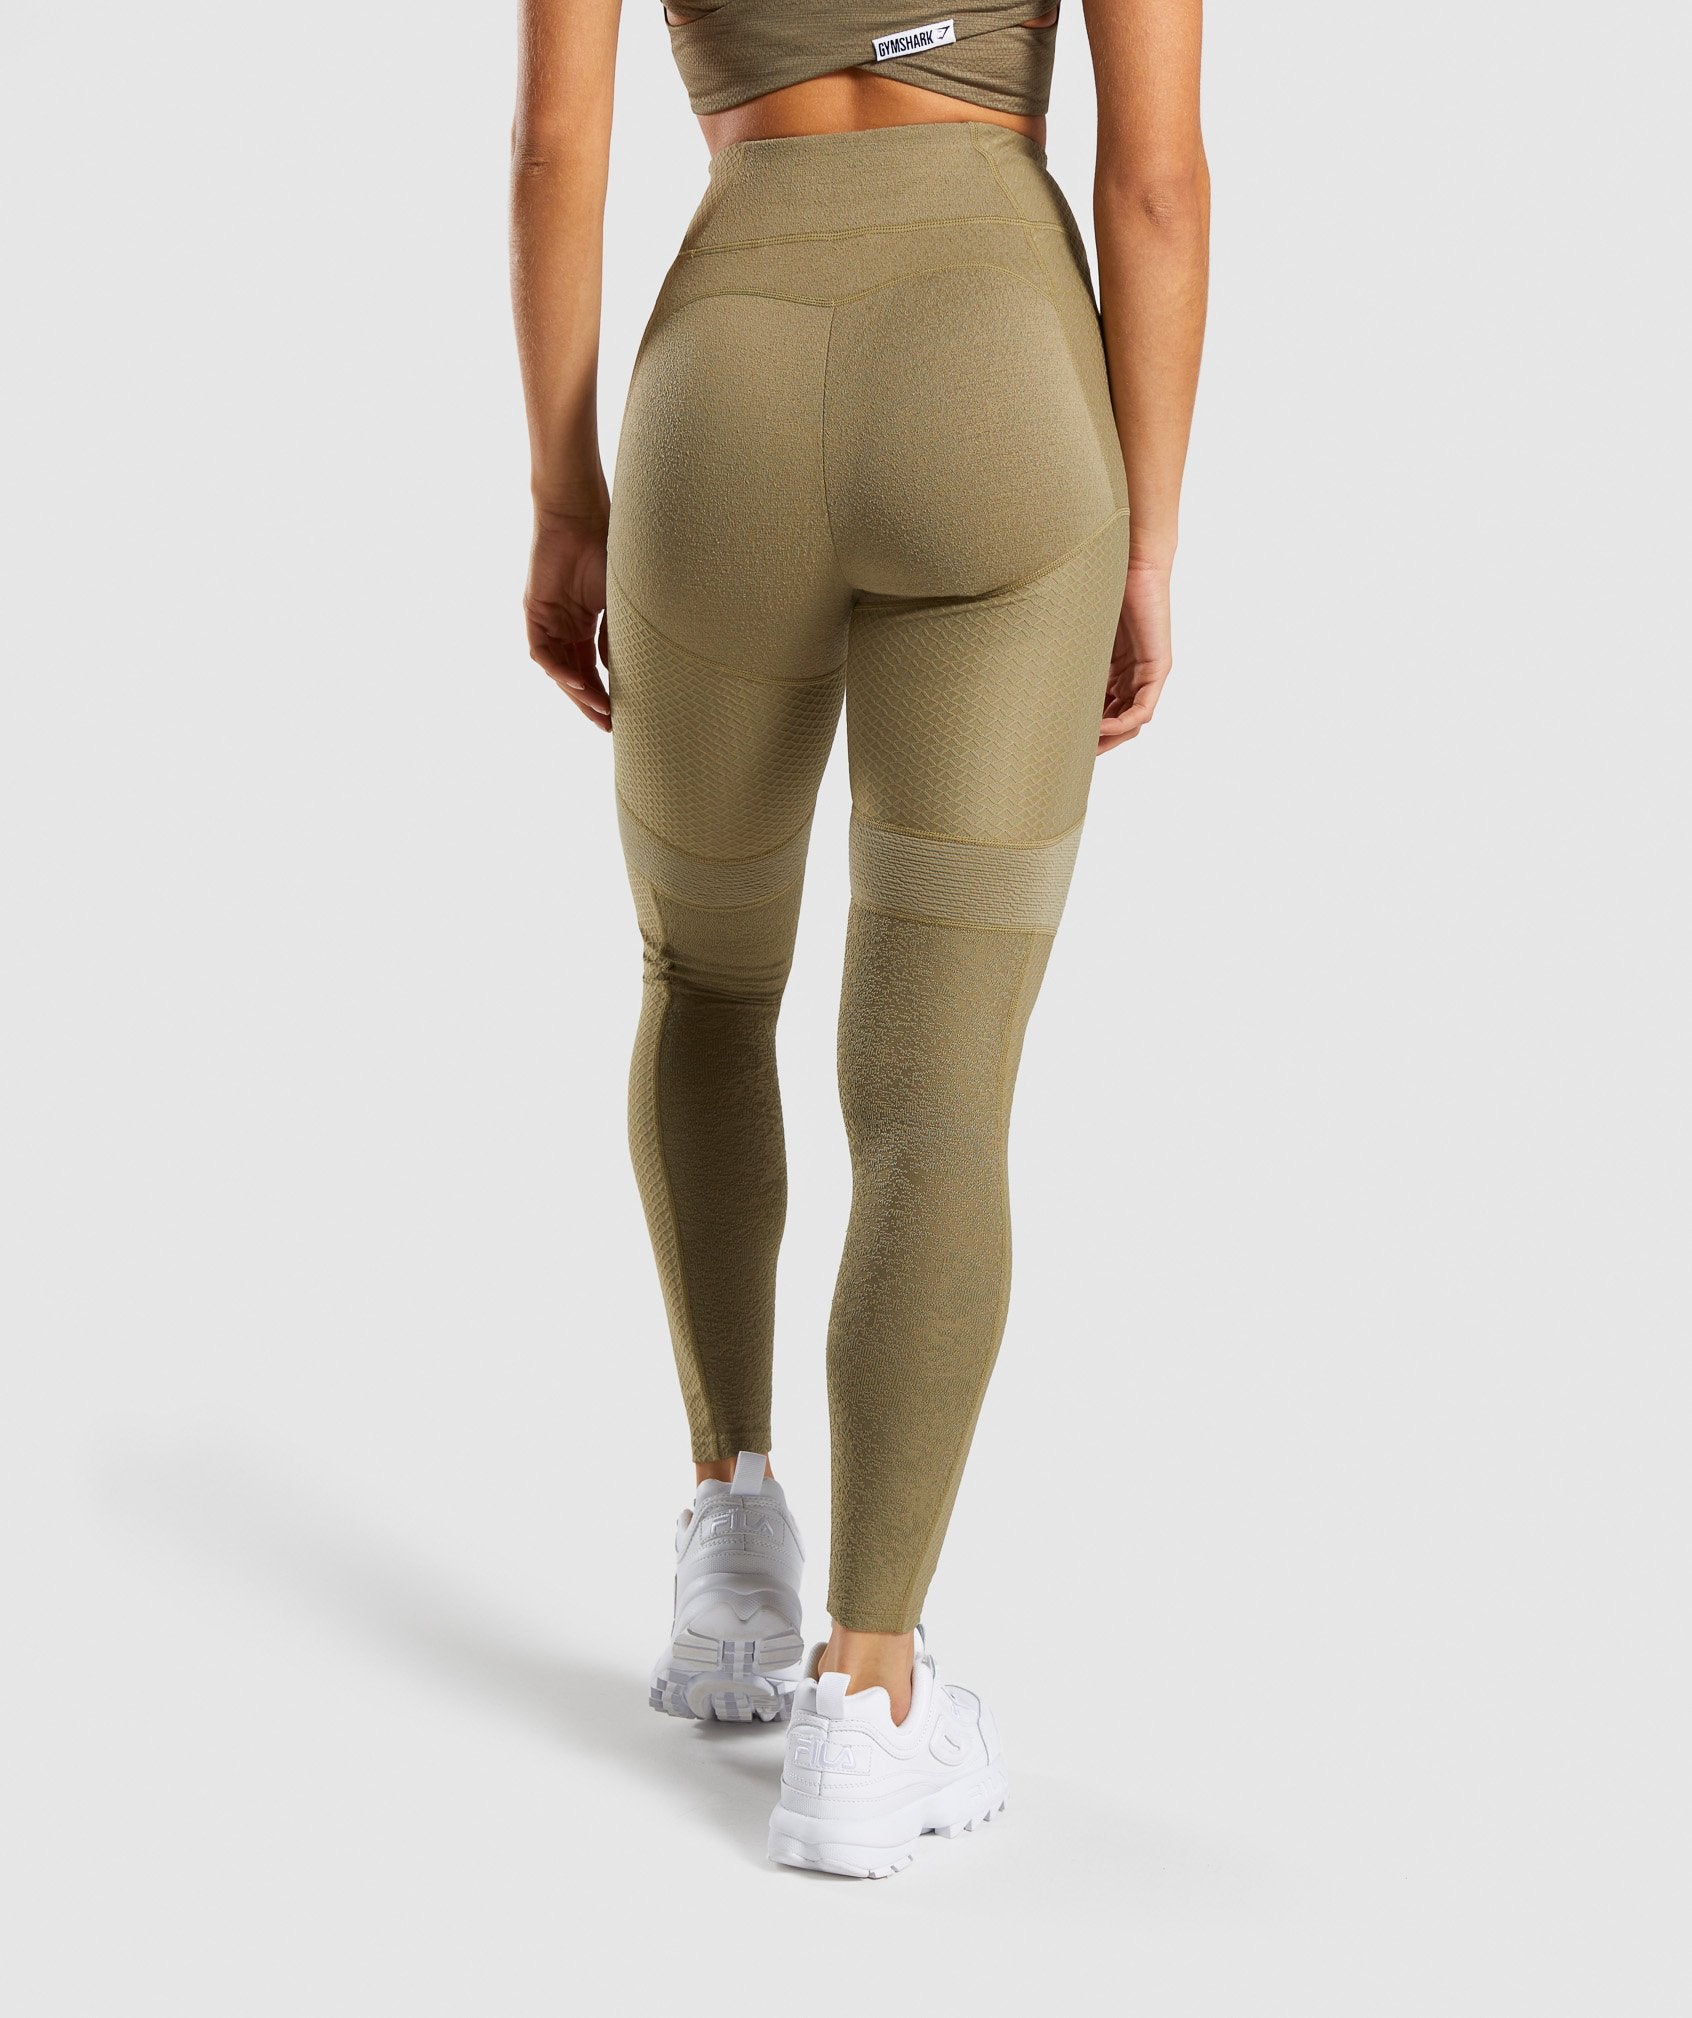 True Texture Leggings in Washed Khaki - view 2